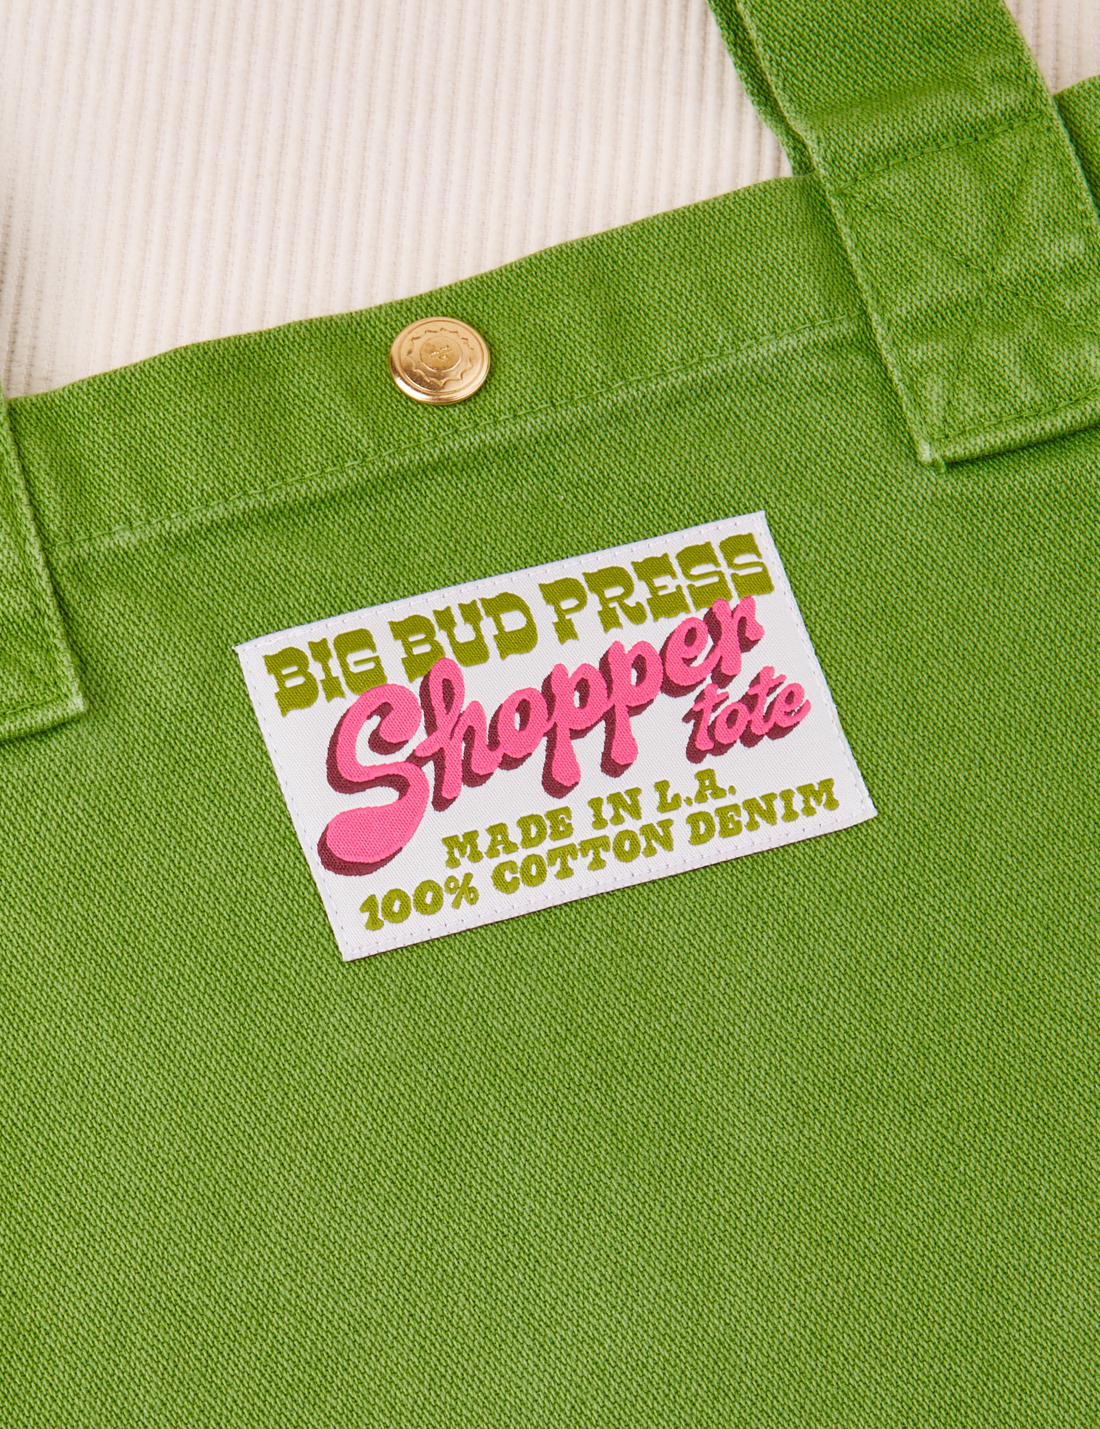 Sun baby brass snap on Shopper Tote Bag in Bright Olive. Bag label with green and pink text that reads "Big Bud Press Shopper Tote, Made in L.A., 100% Cotton Denim on white background